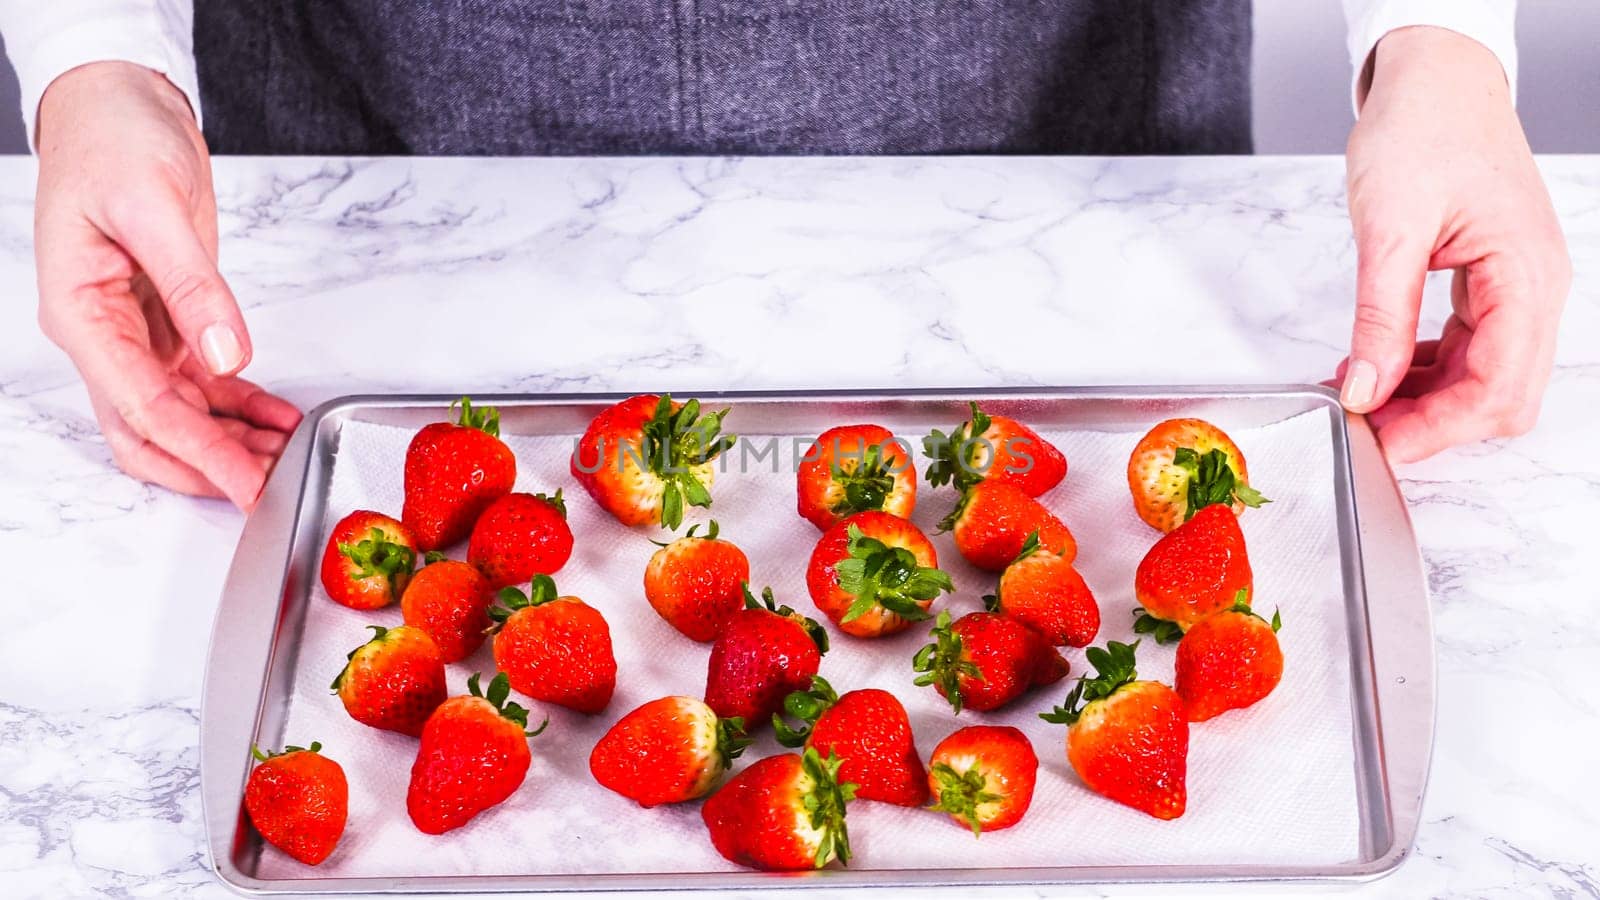 Washed Strawberries Drying on a Paper Towel-Lined Baking Sheet by arinahabich